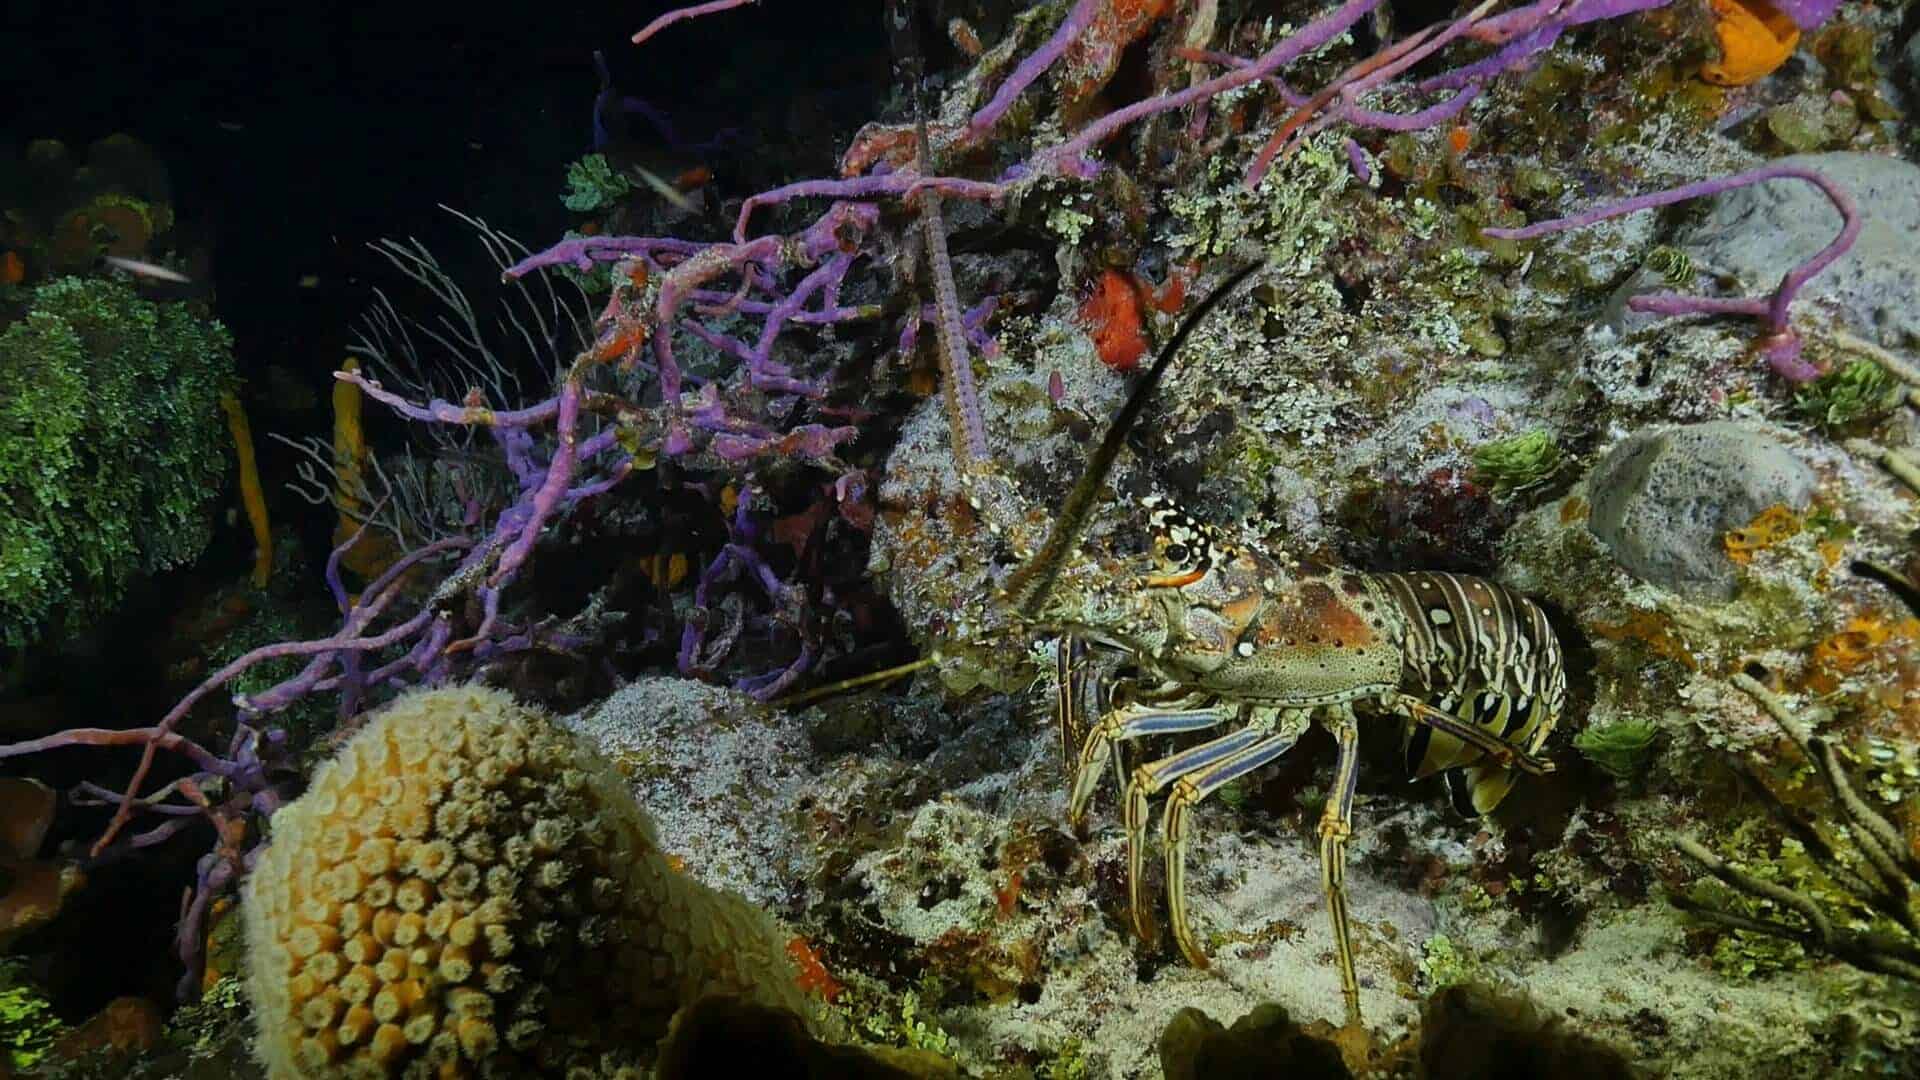 Spiny Lobster at night on colorful reef in Belize